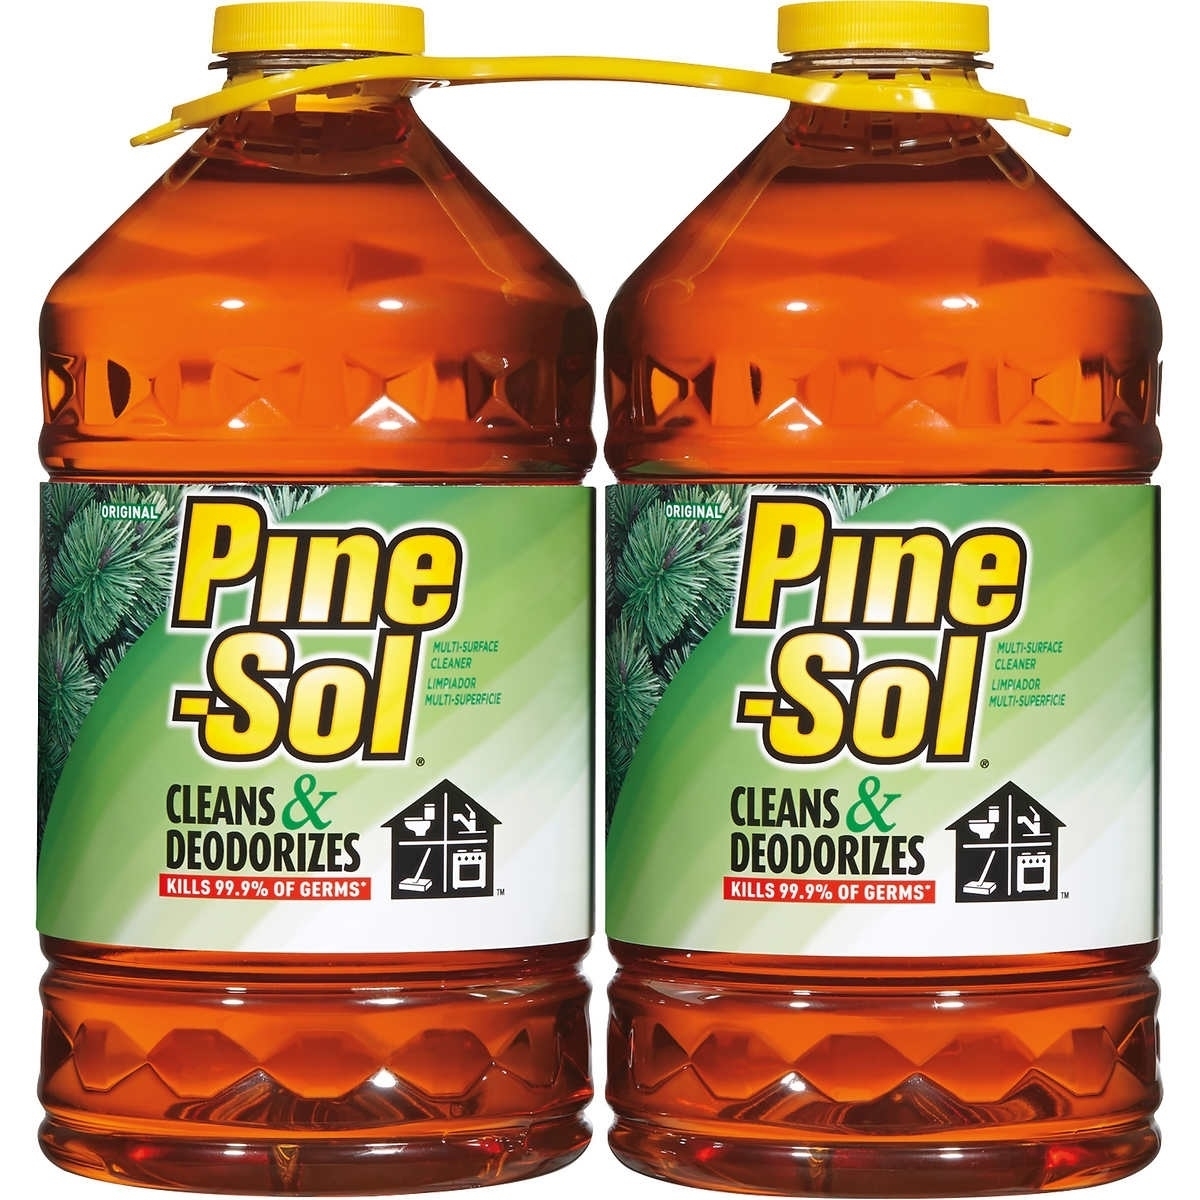 Pine-Sol Multi-Surface Cleaner, Pine Scent, 100 Ounce (2 Count)